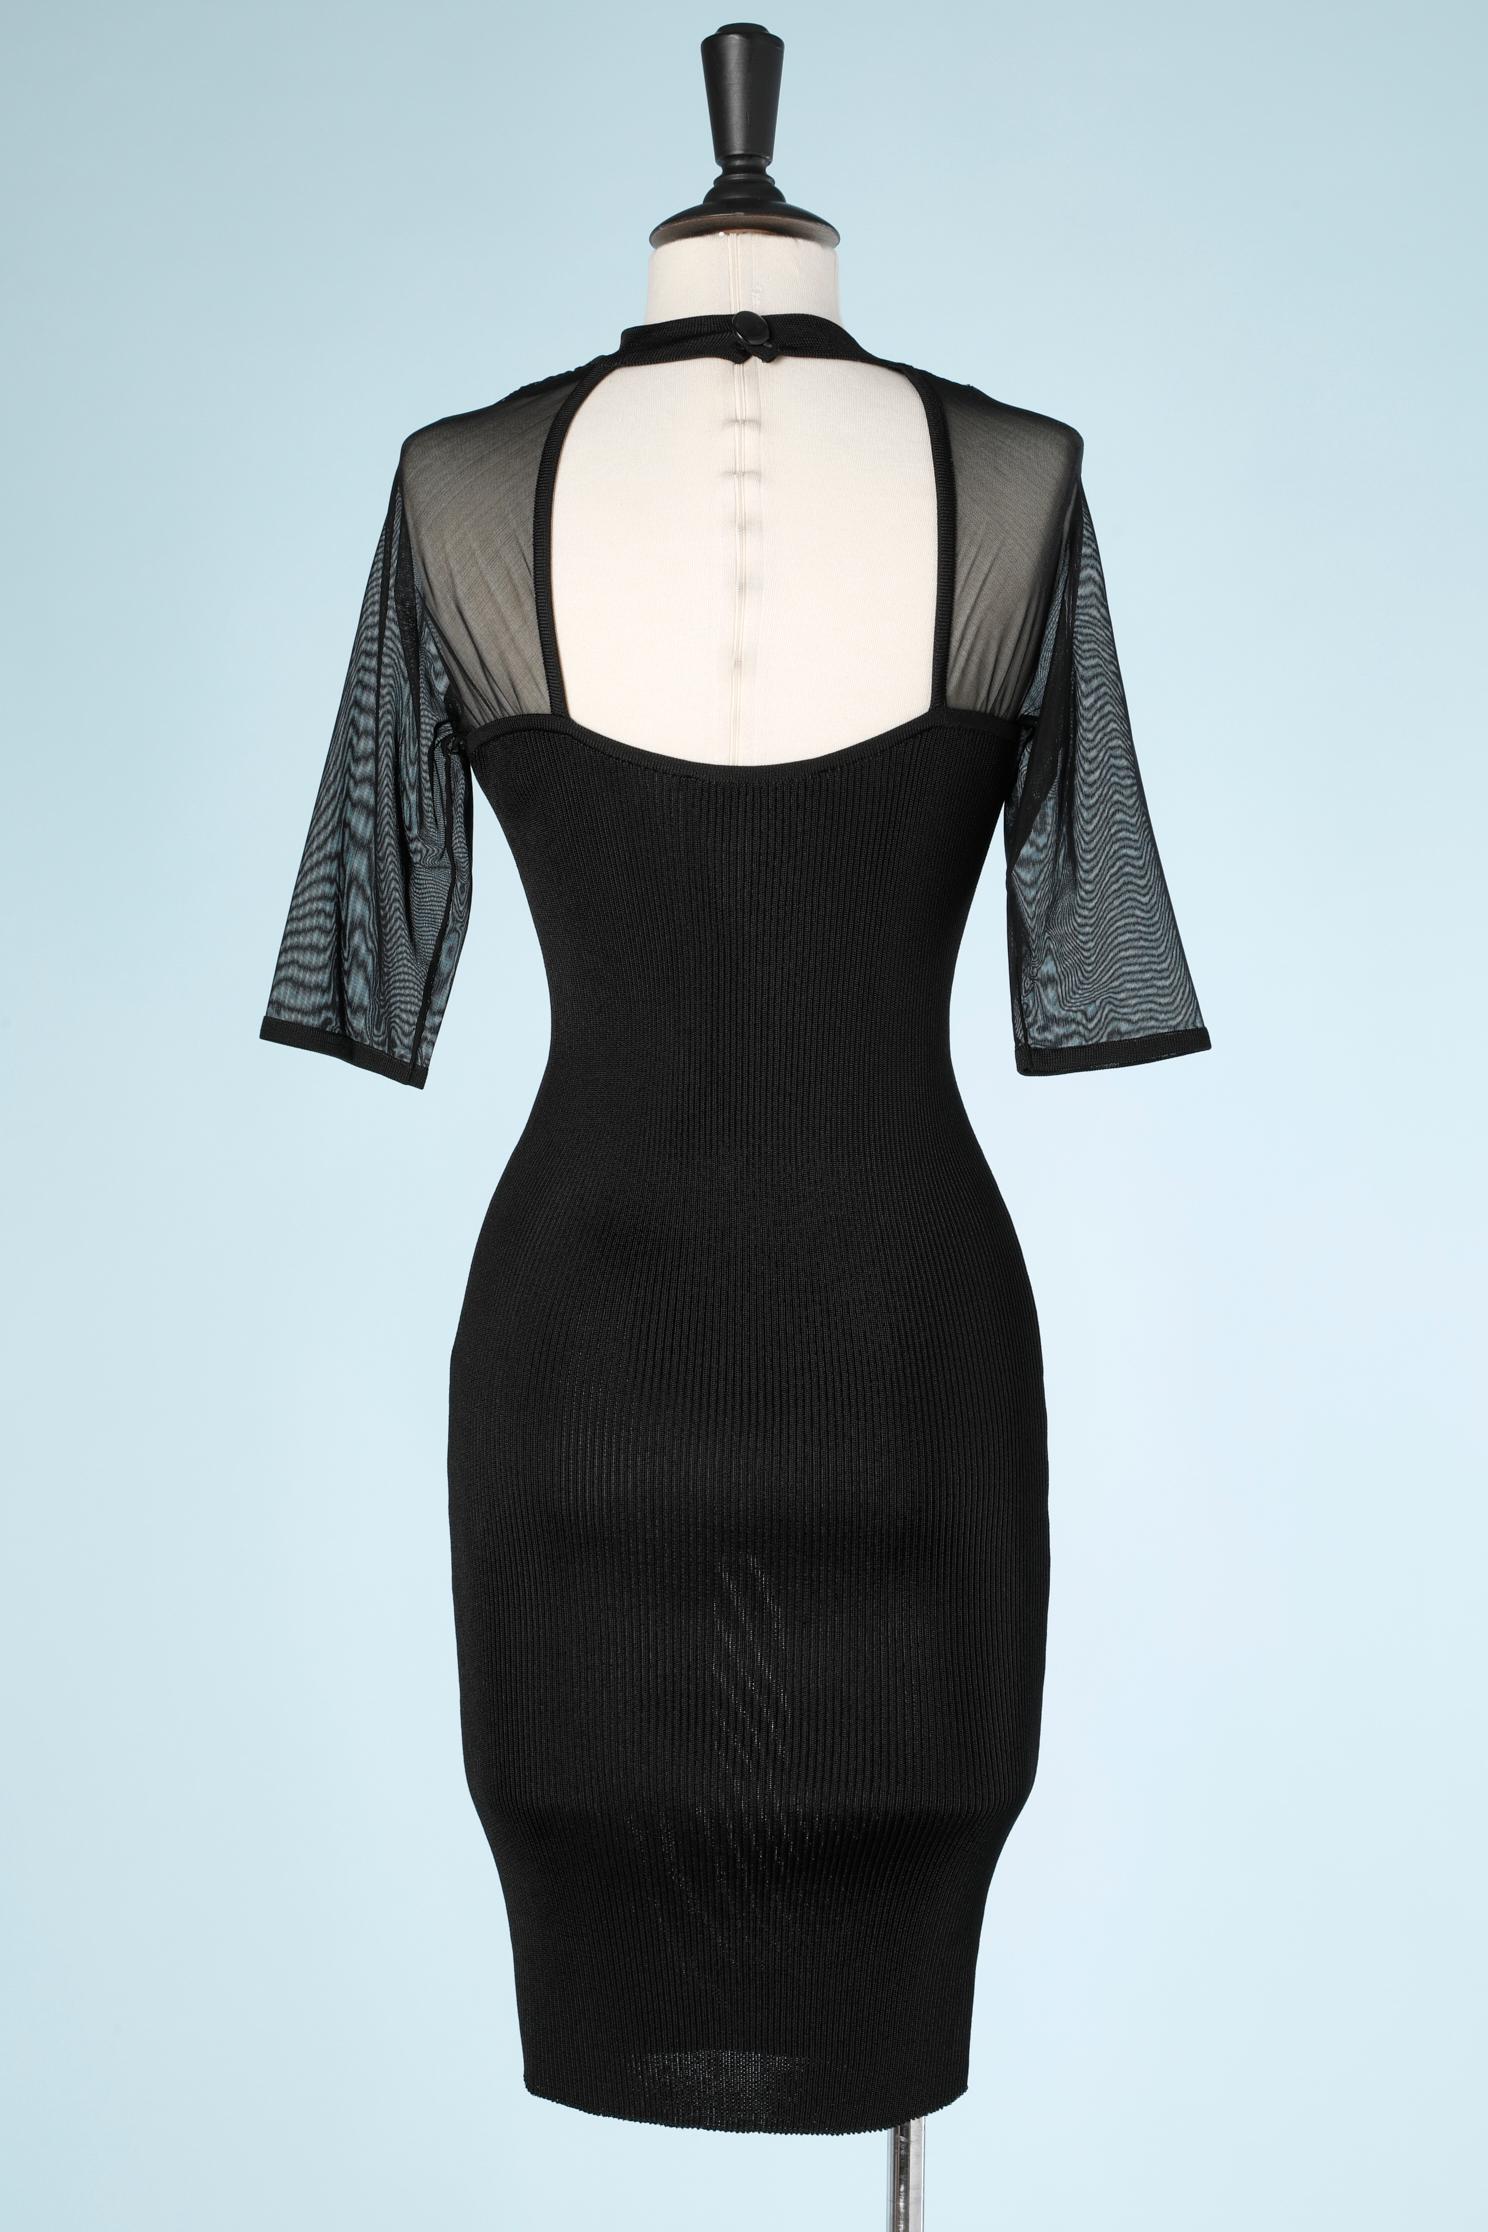 Black knit dress with passementerie lace on the cut off  Christian Lacroix  For Sale 1